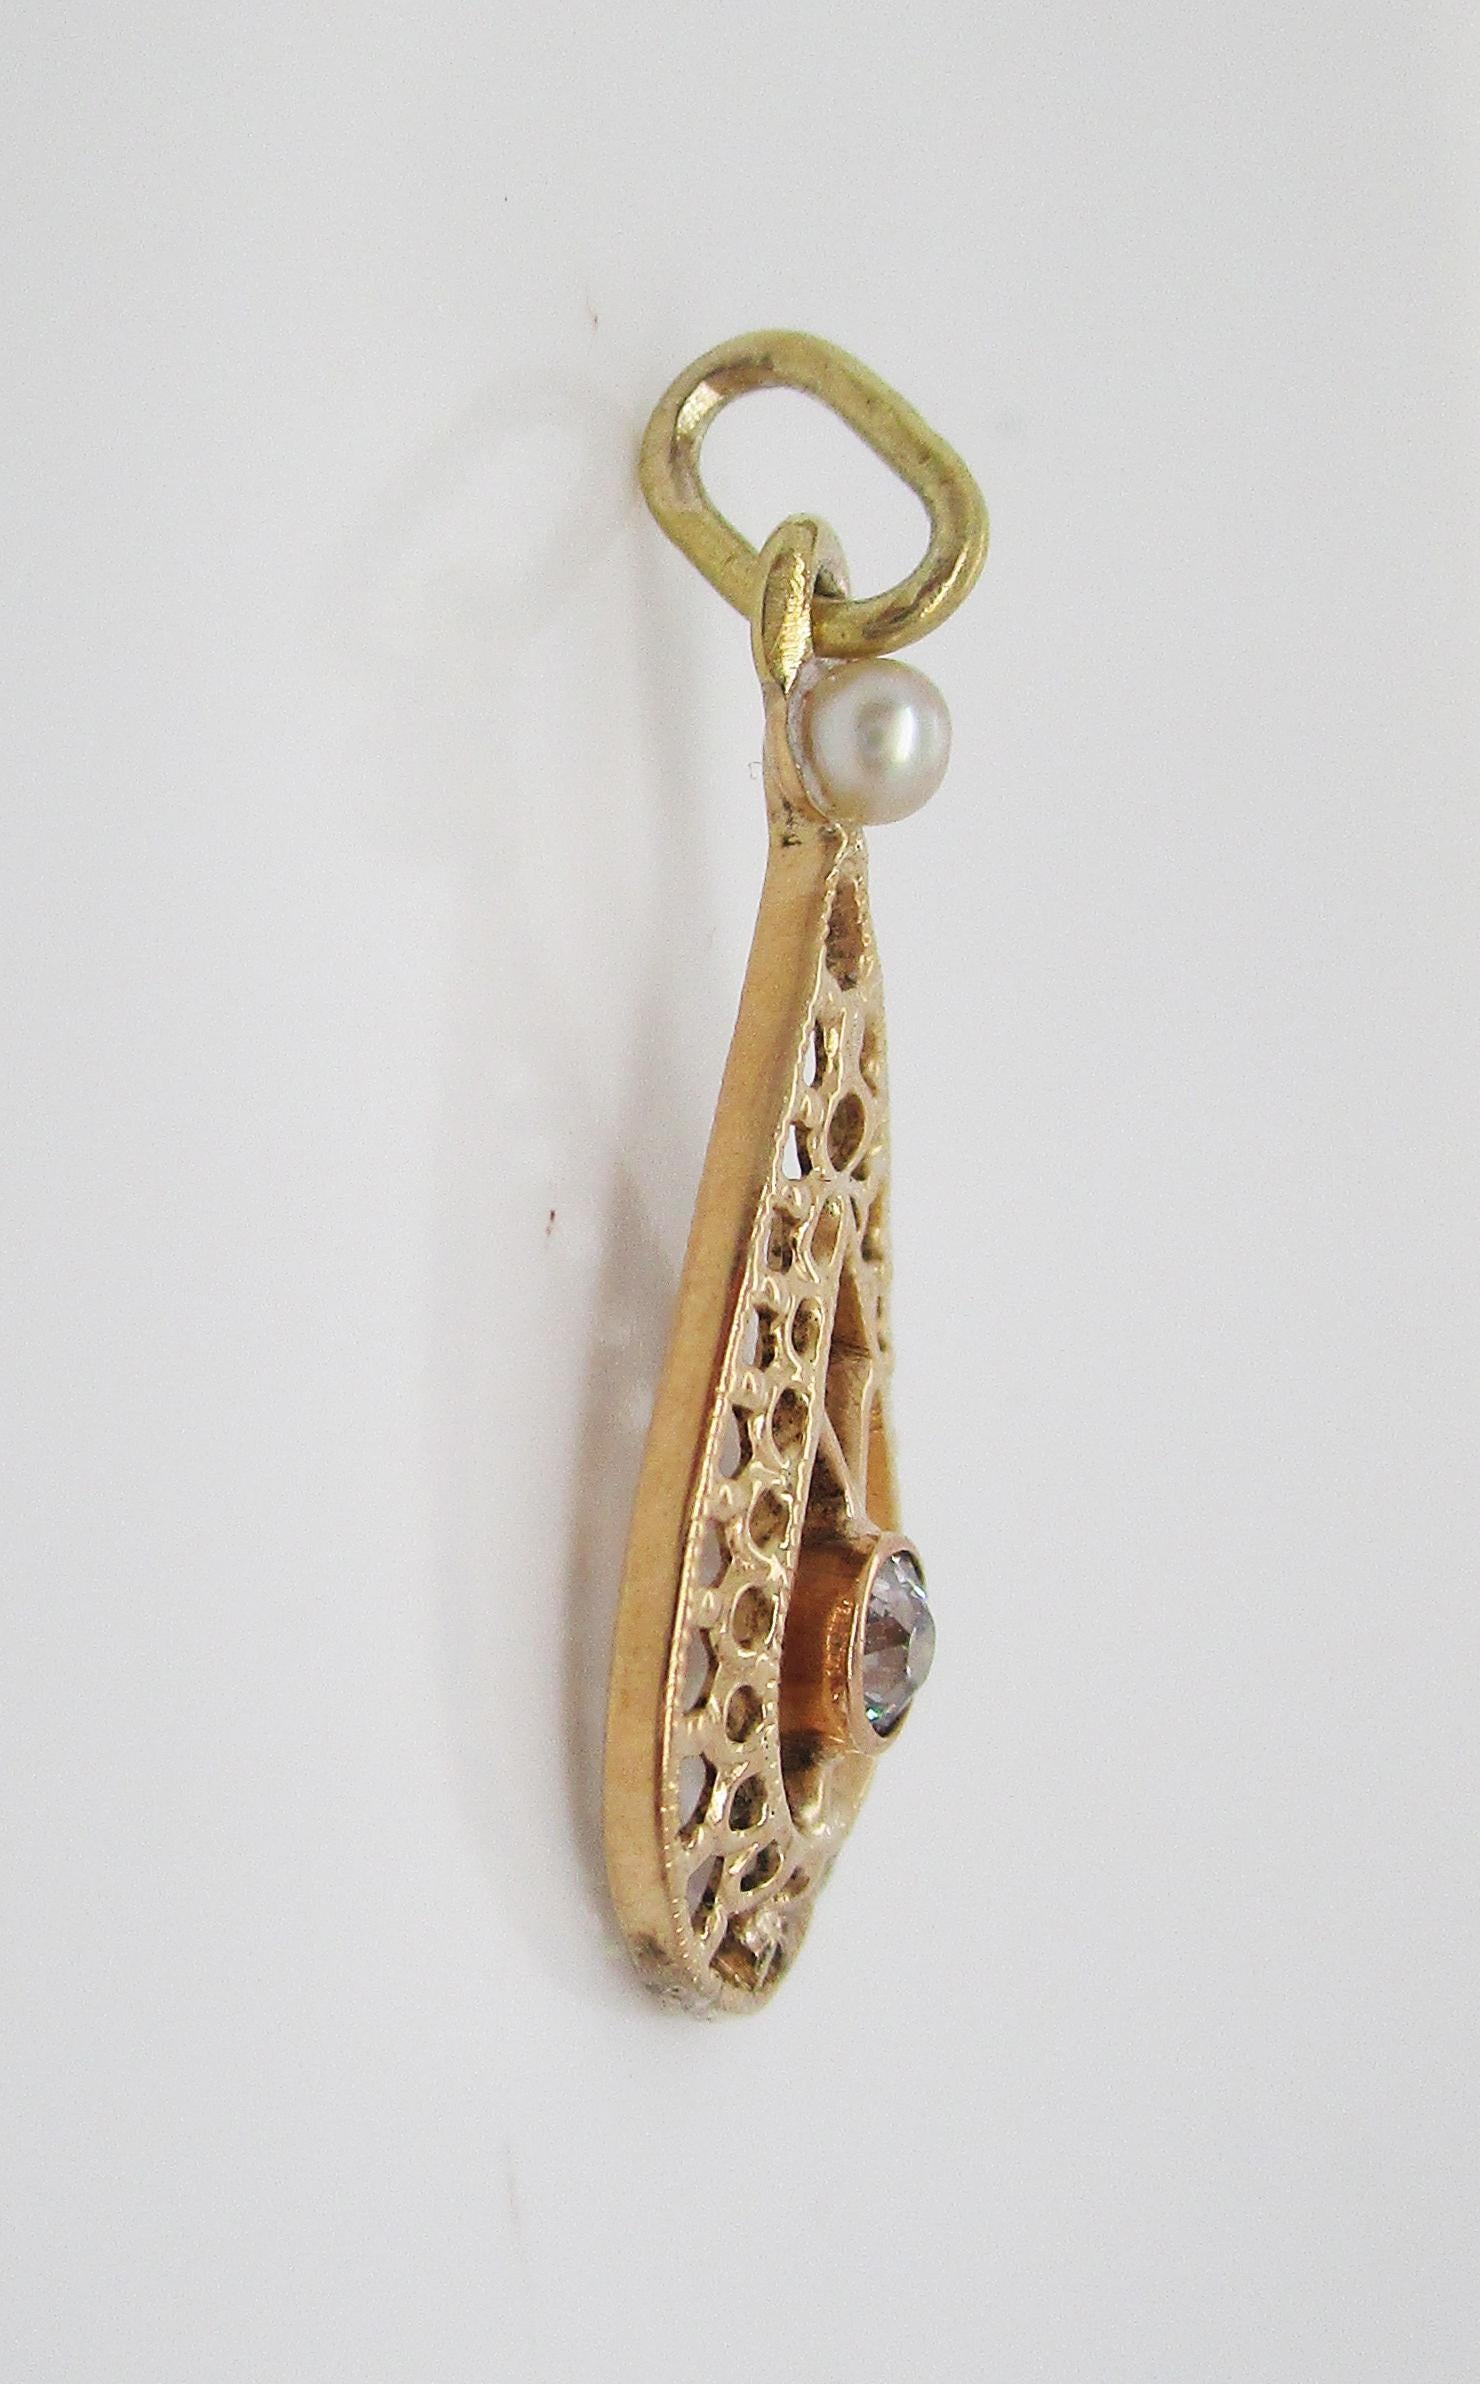 Edwardian 14 Karat Yellow Gold Diamond and Pearl Pear Shaped Moveable Pendant In Excellent Condition For Sale In Lexington, KY